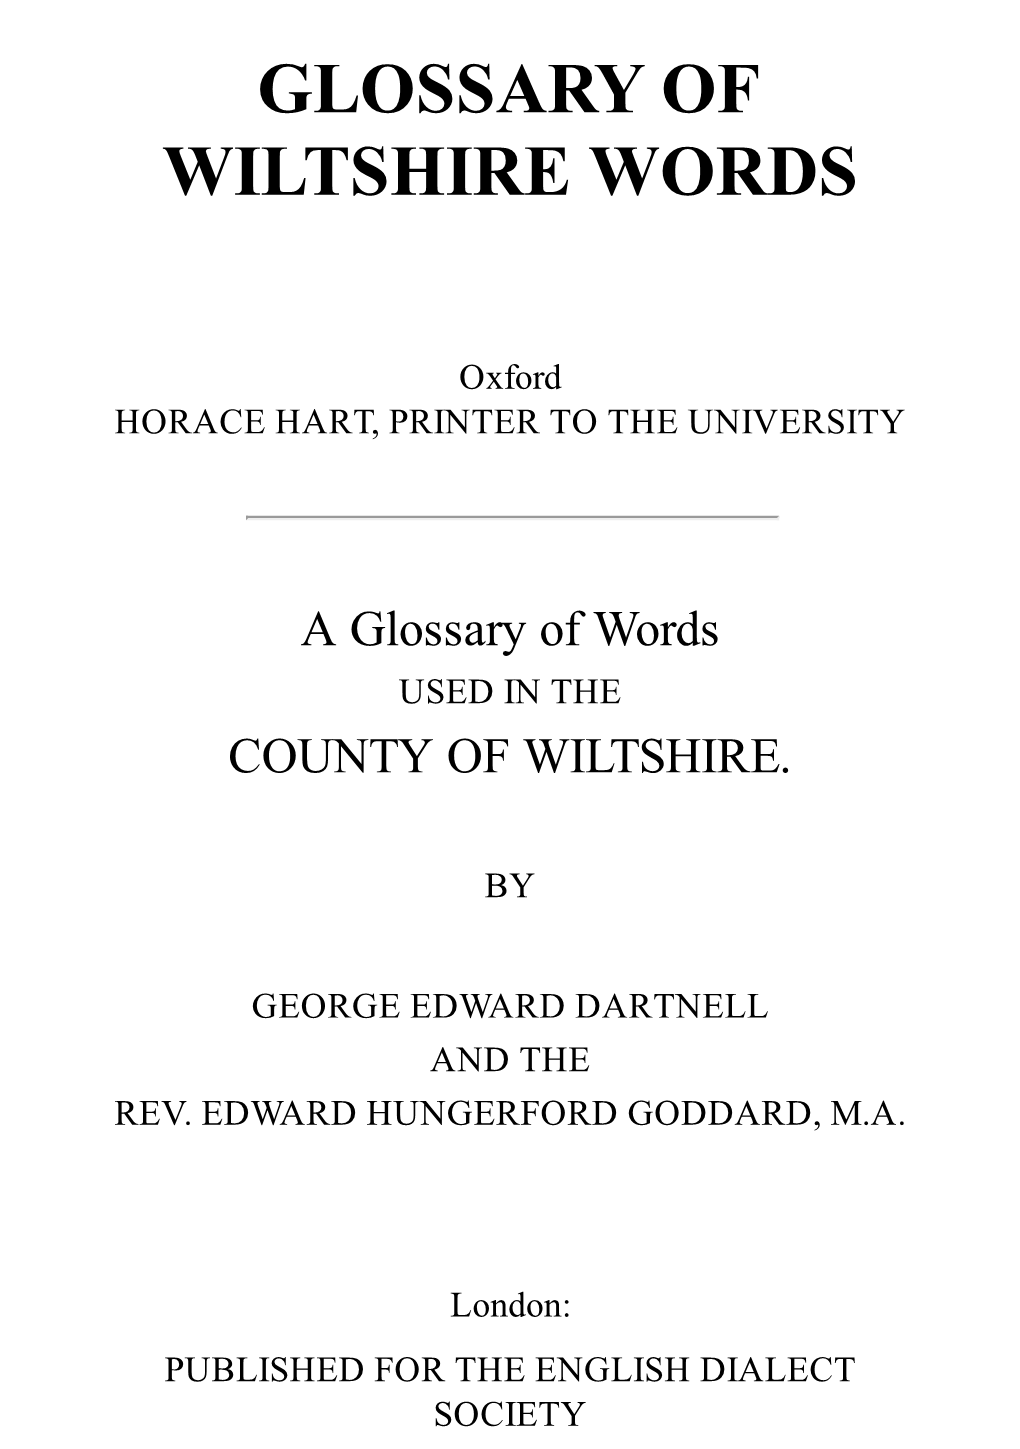 Glossary of Wiltshire Words